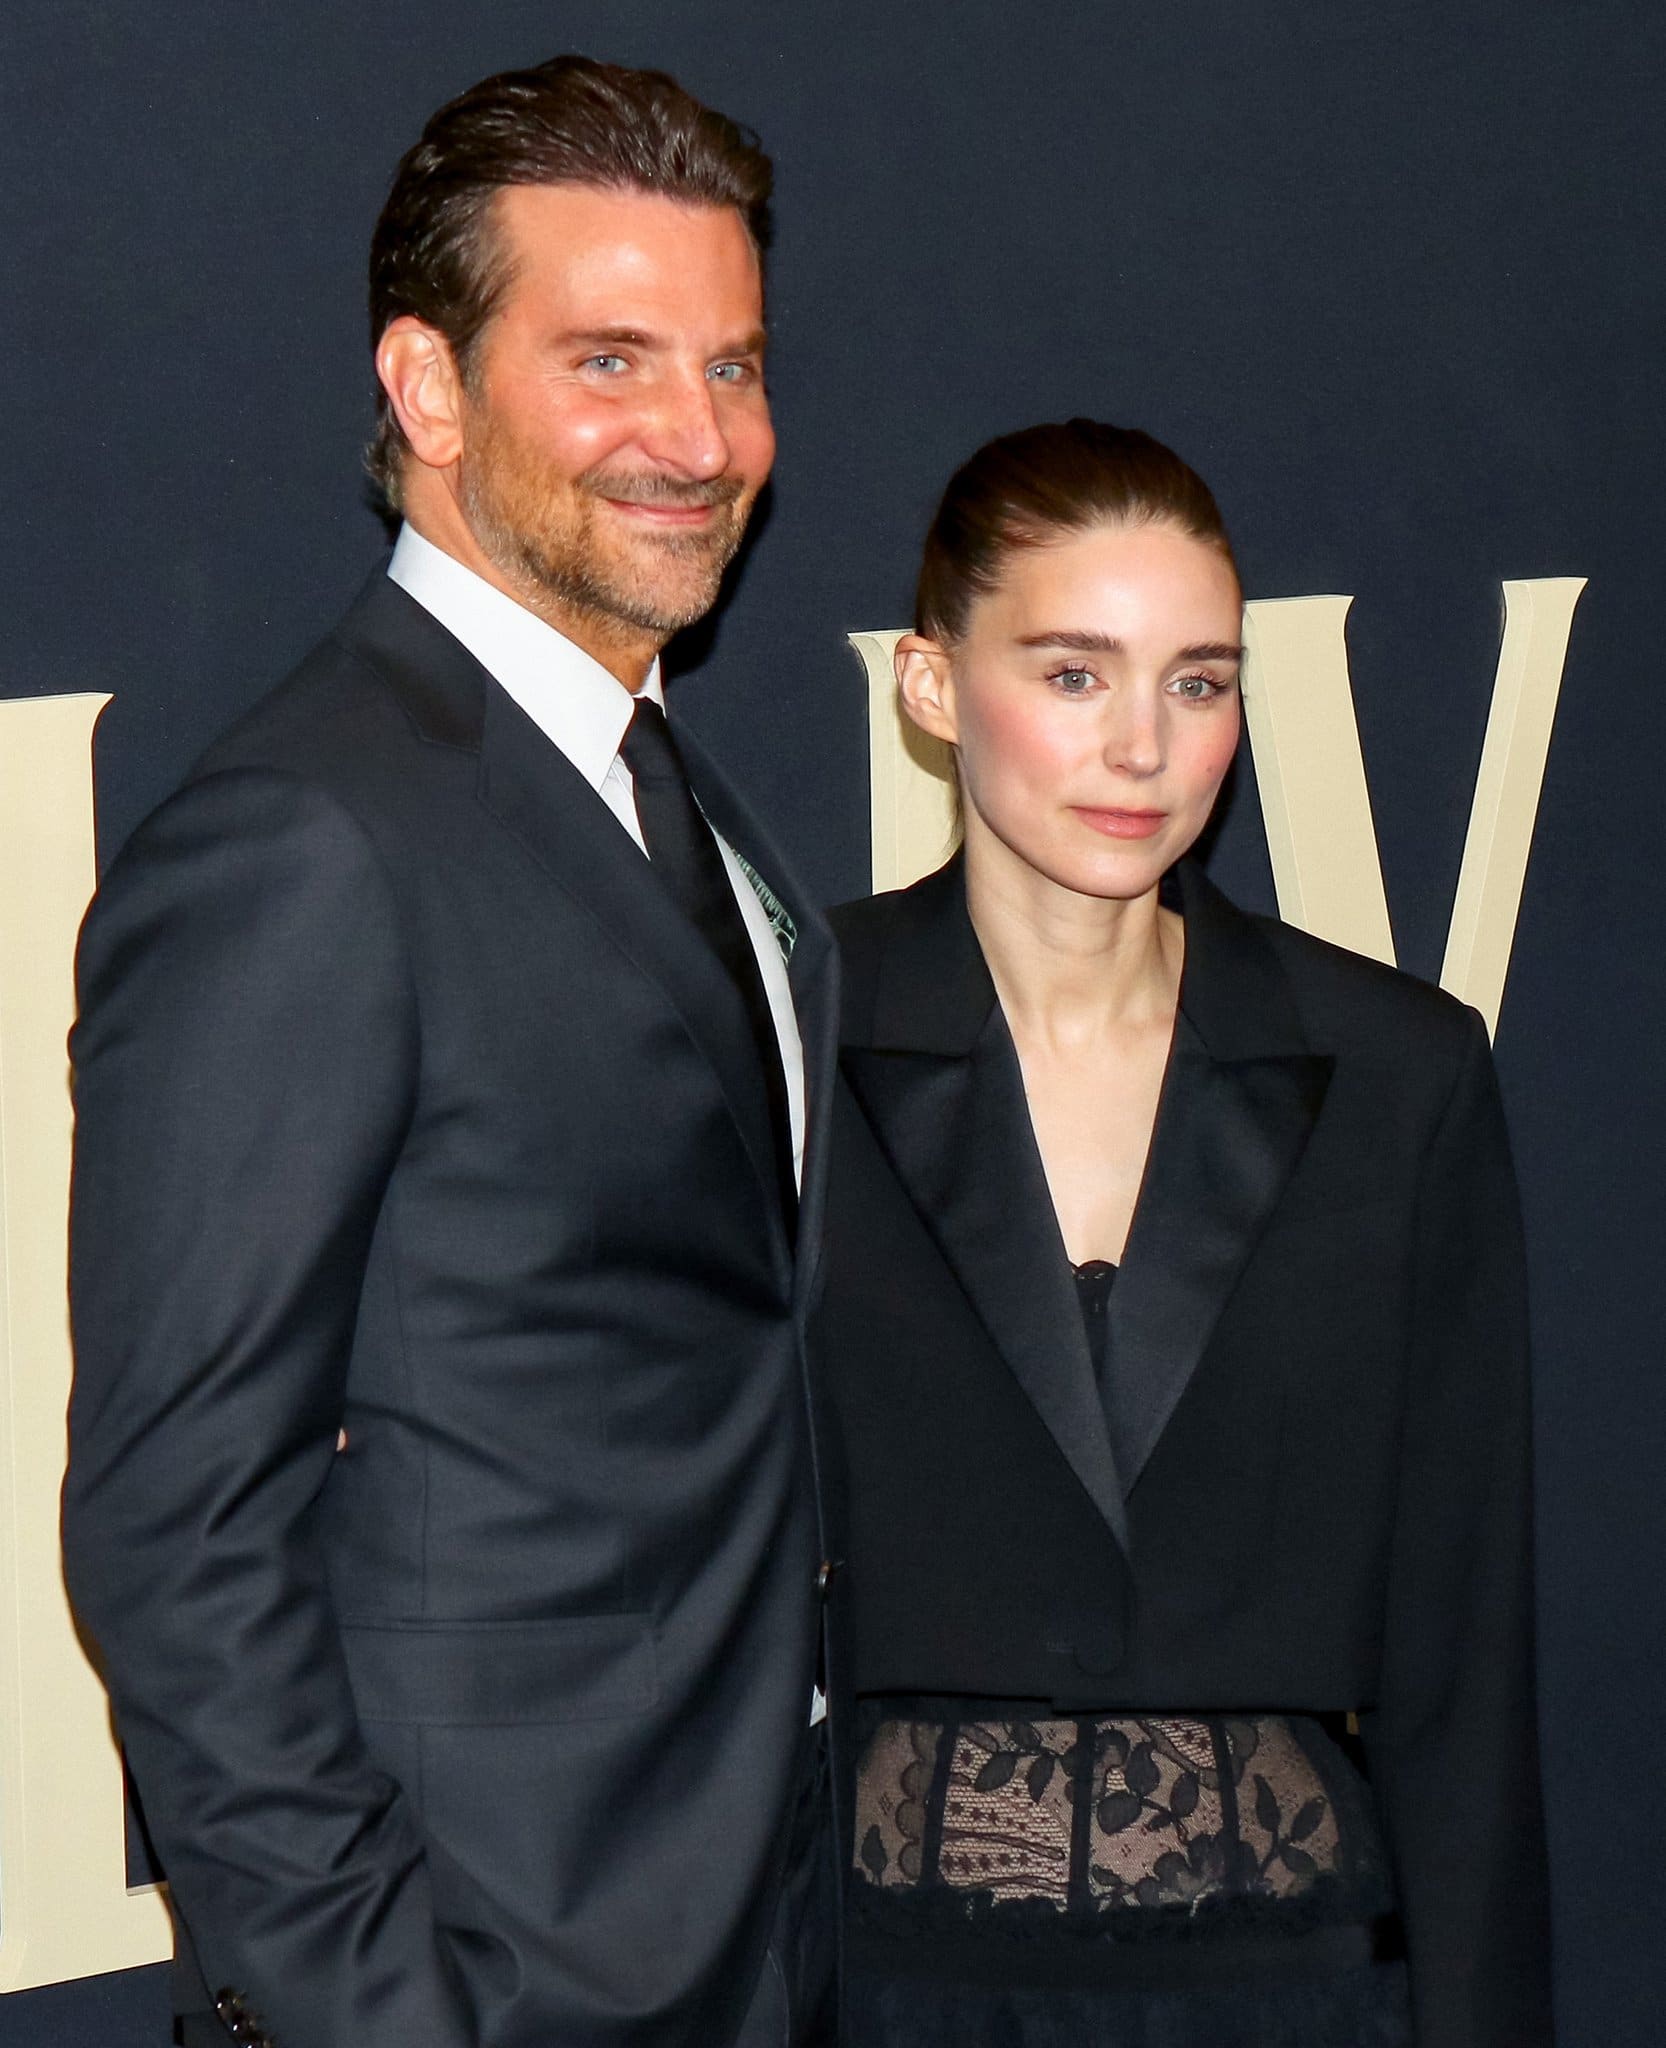 Bradley Cooper looks dashing in a black suit with a white dress shirt and a slim black tie